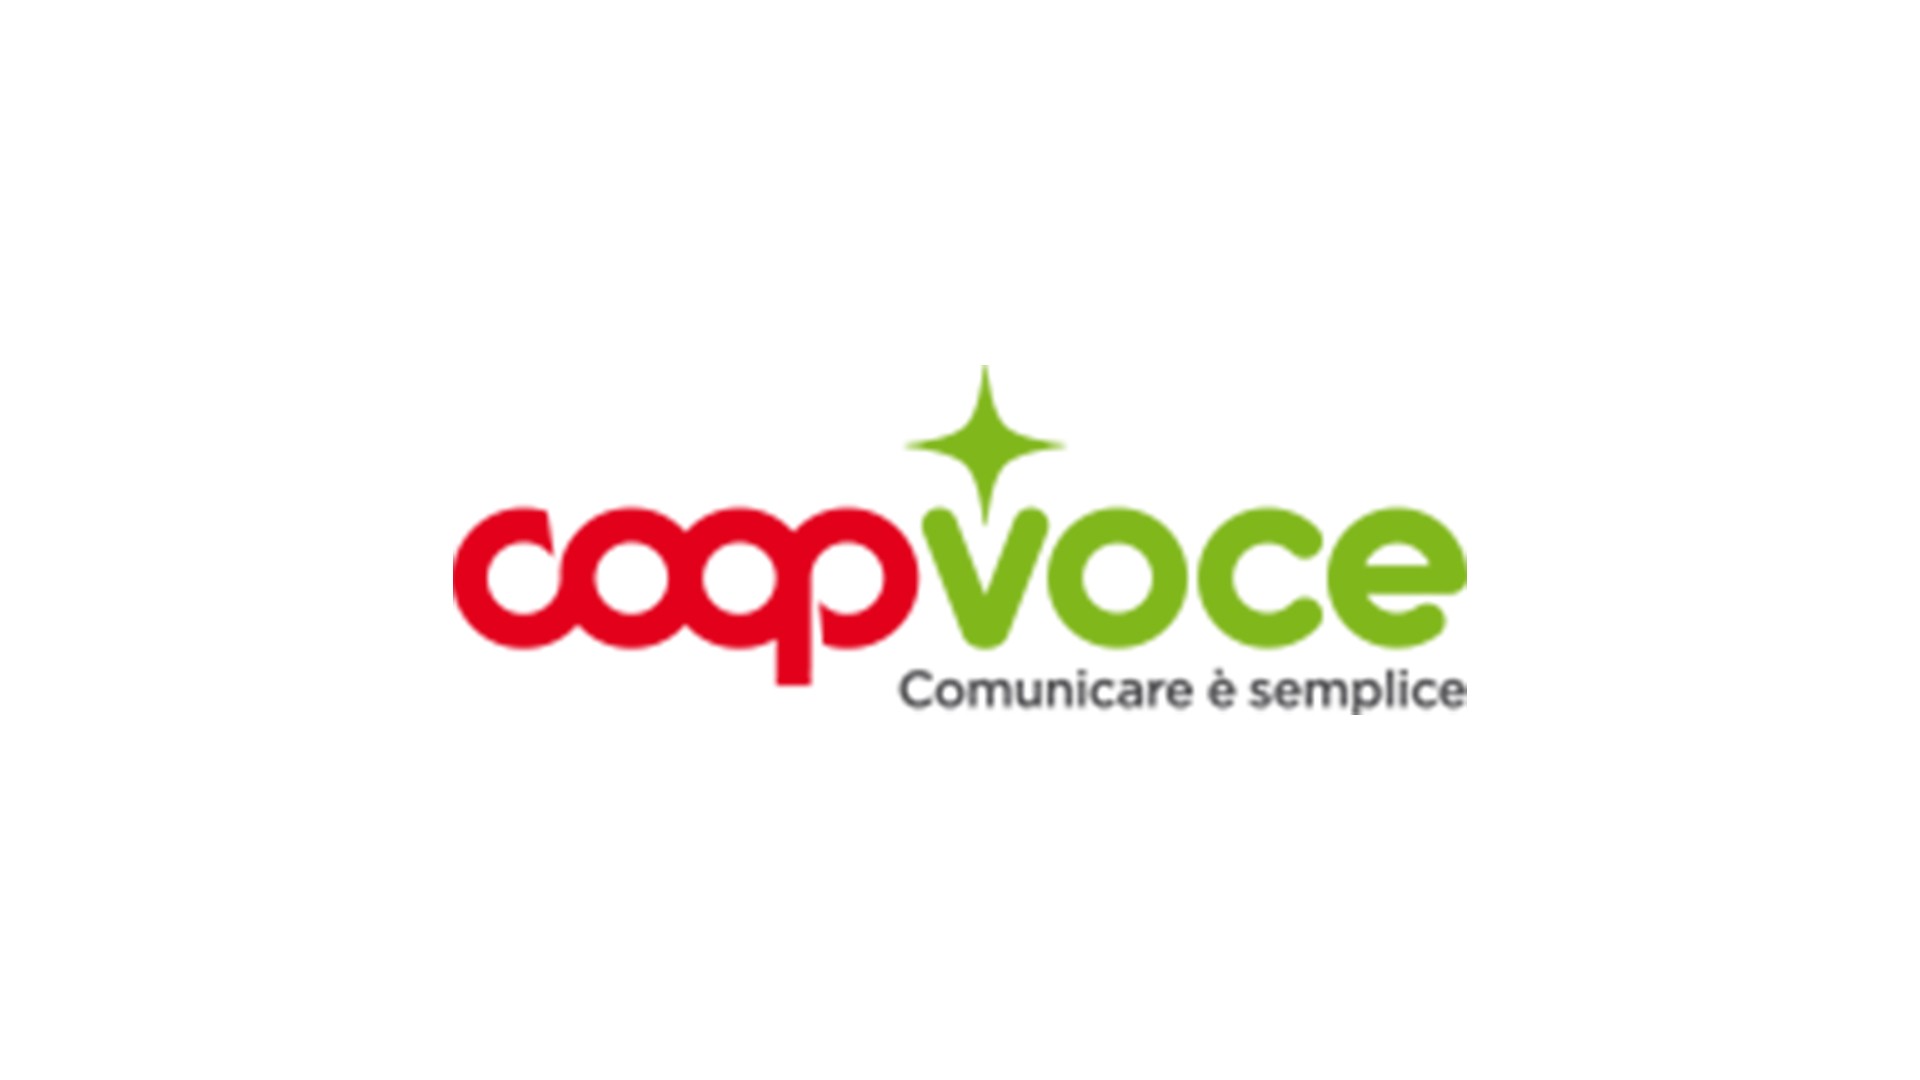 CoopVoce introduce